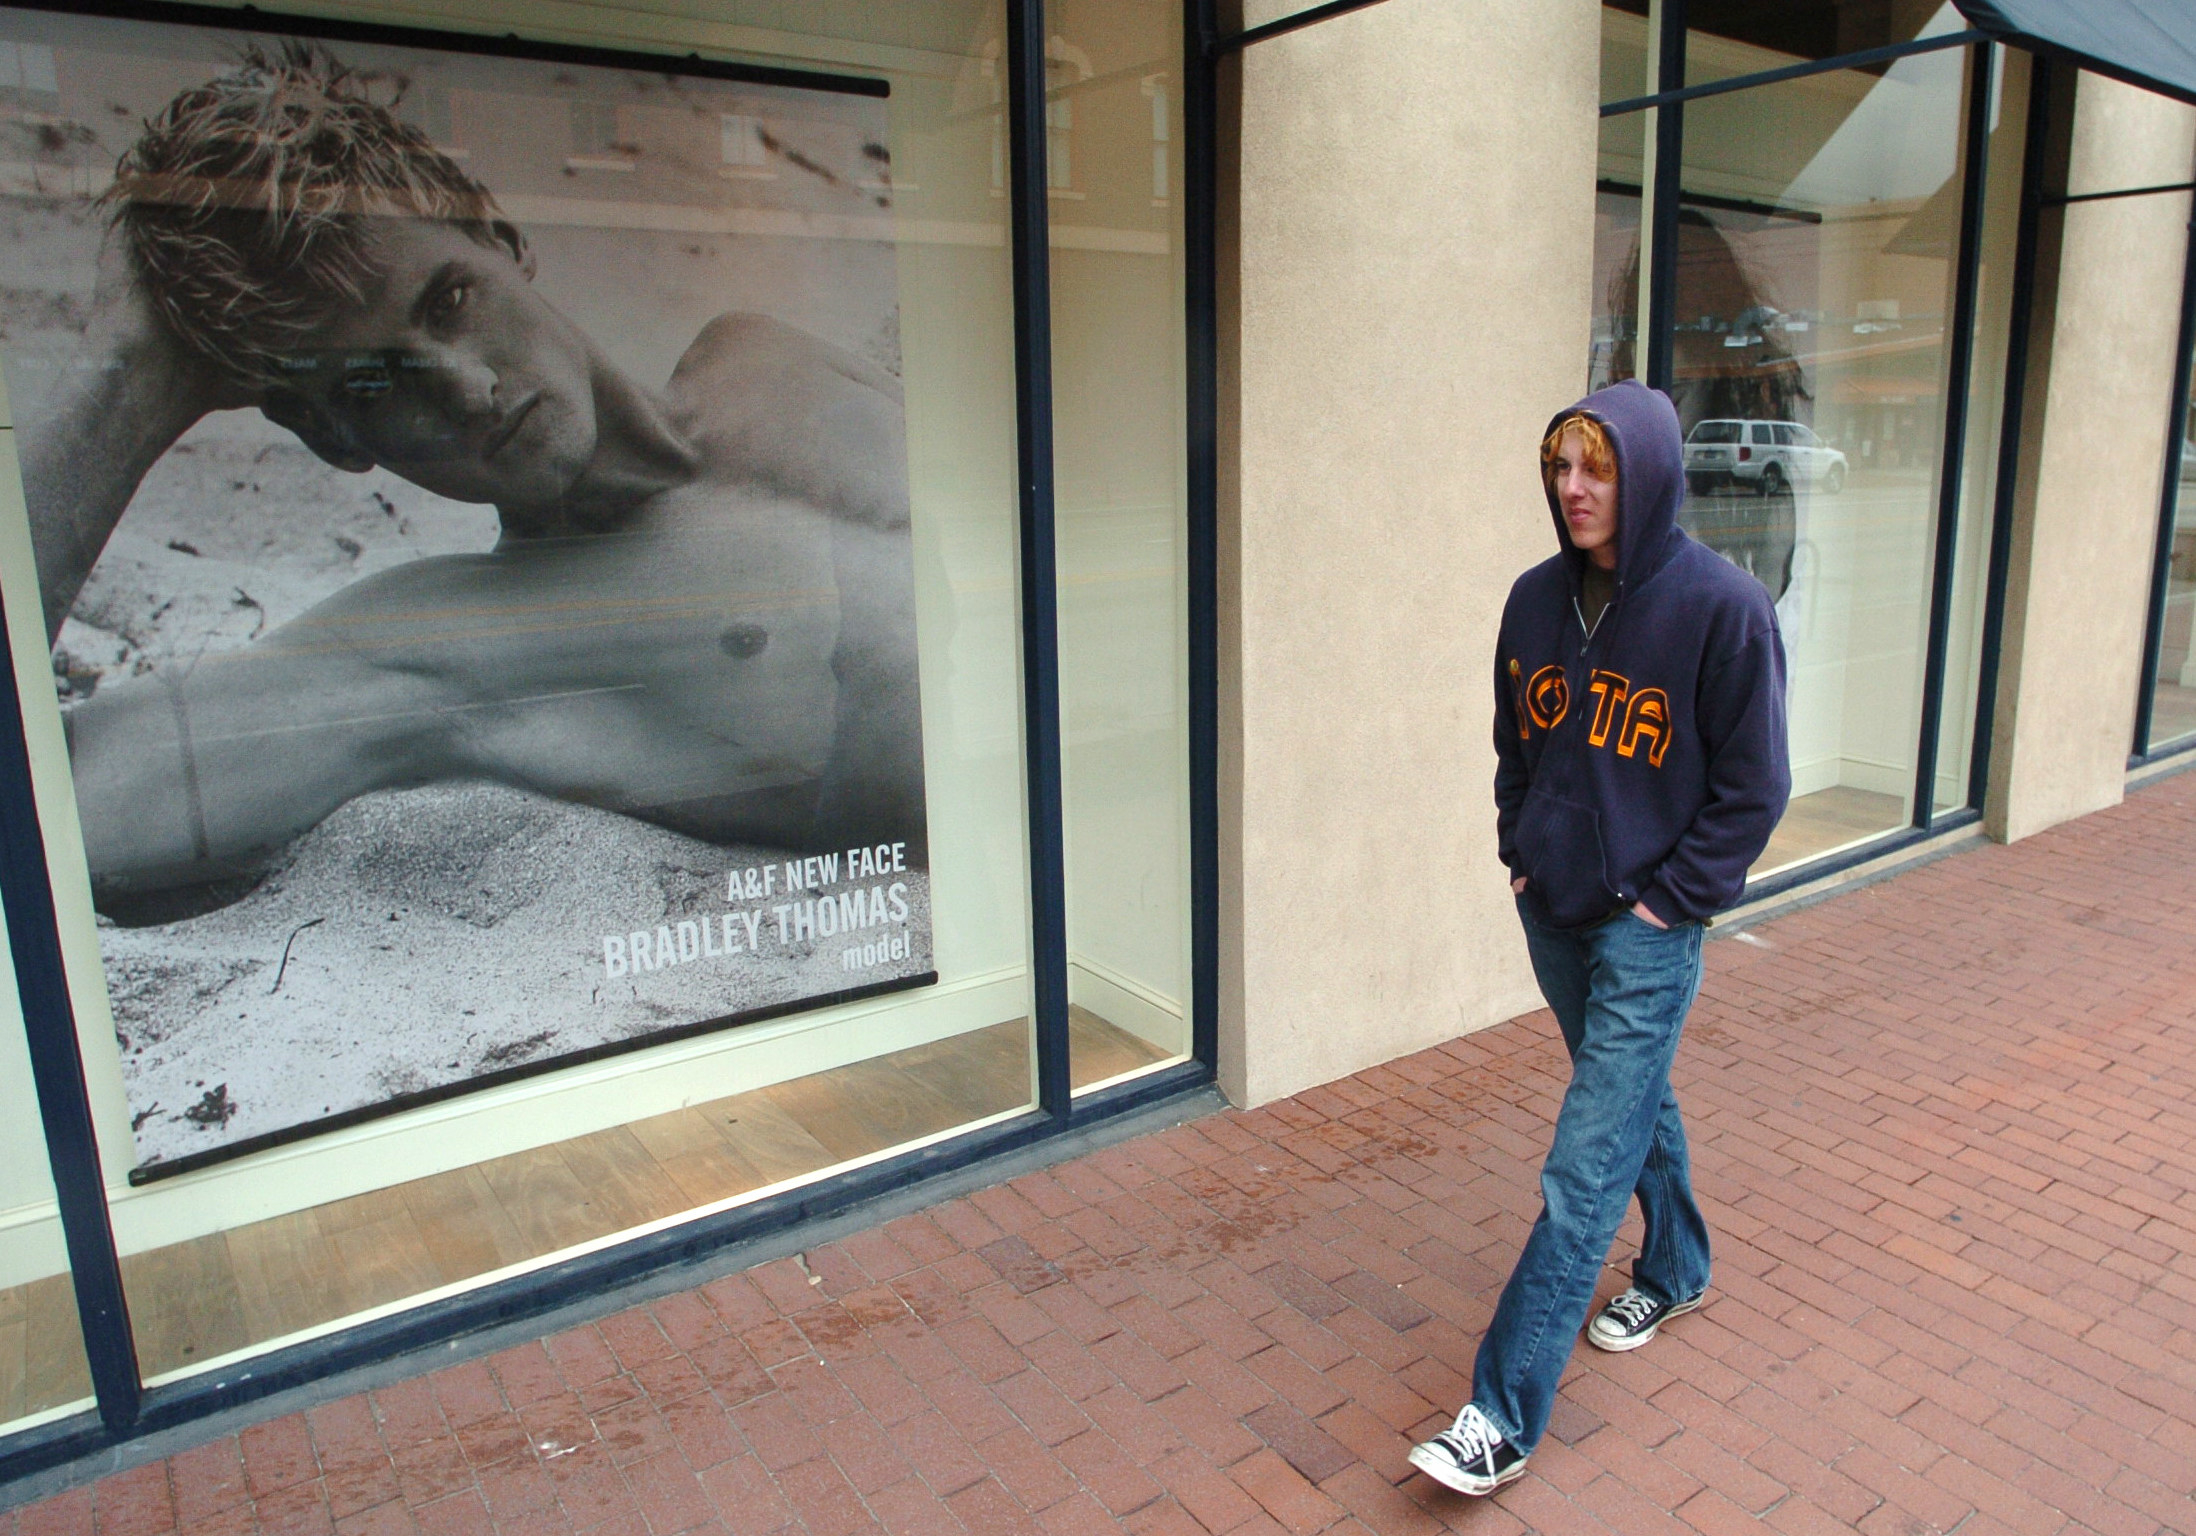 Man walking by A&amp;amp;F store window with a photo of a shirtless man in it